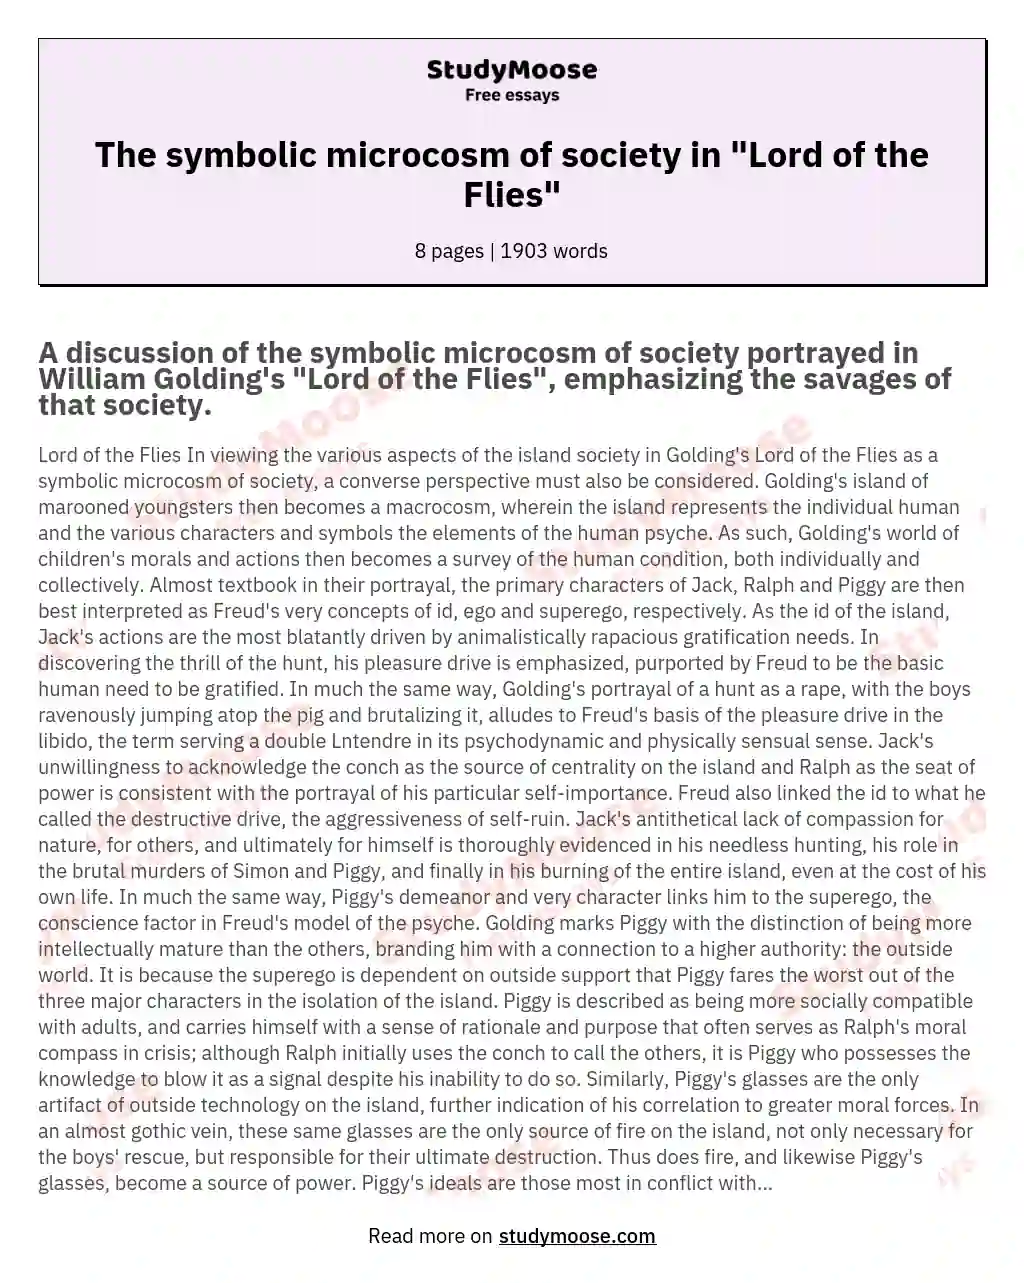 The symbolic microcosm of society in "Lord of the Flies" essay